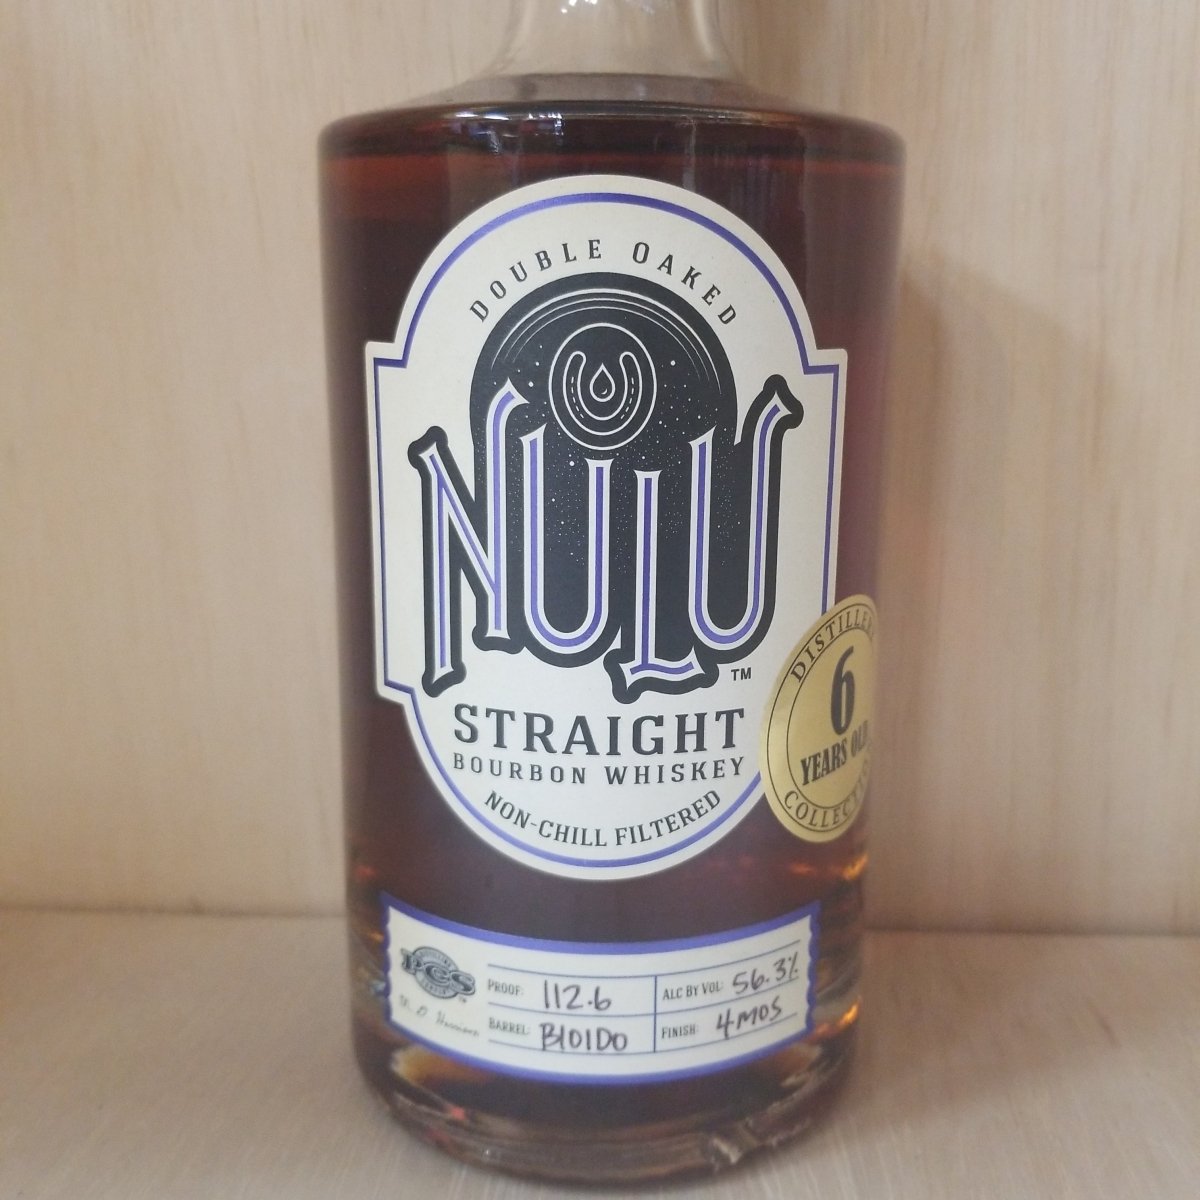 Nulo Double Oaked Straight Bourbon 750ml (Barrel B101DO, proof 112.6) - Sip & Say